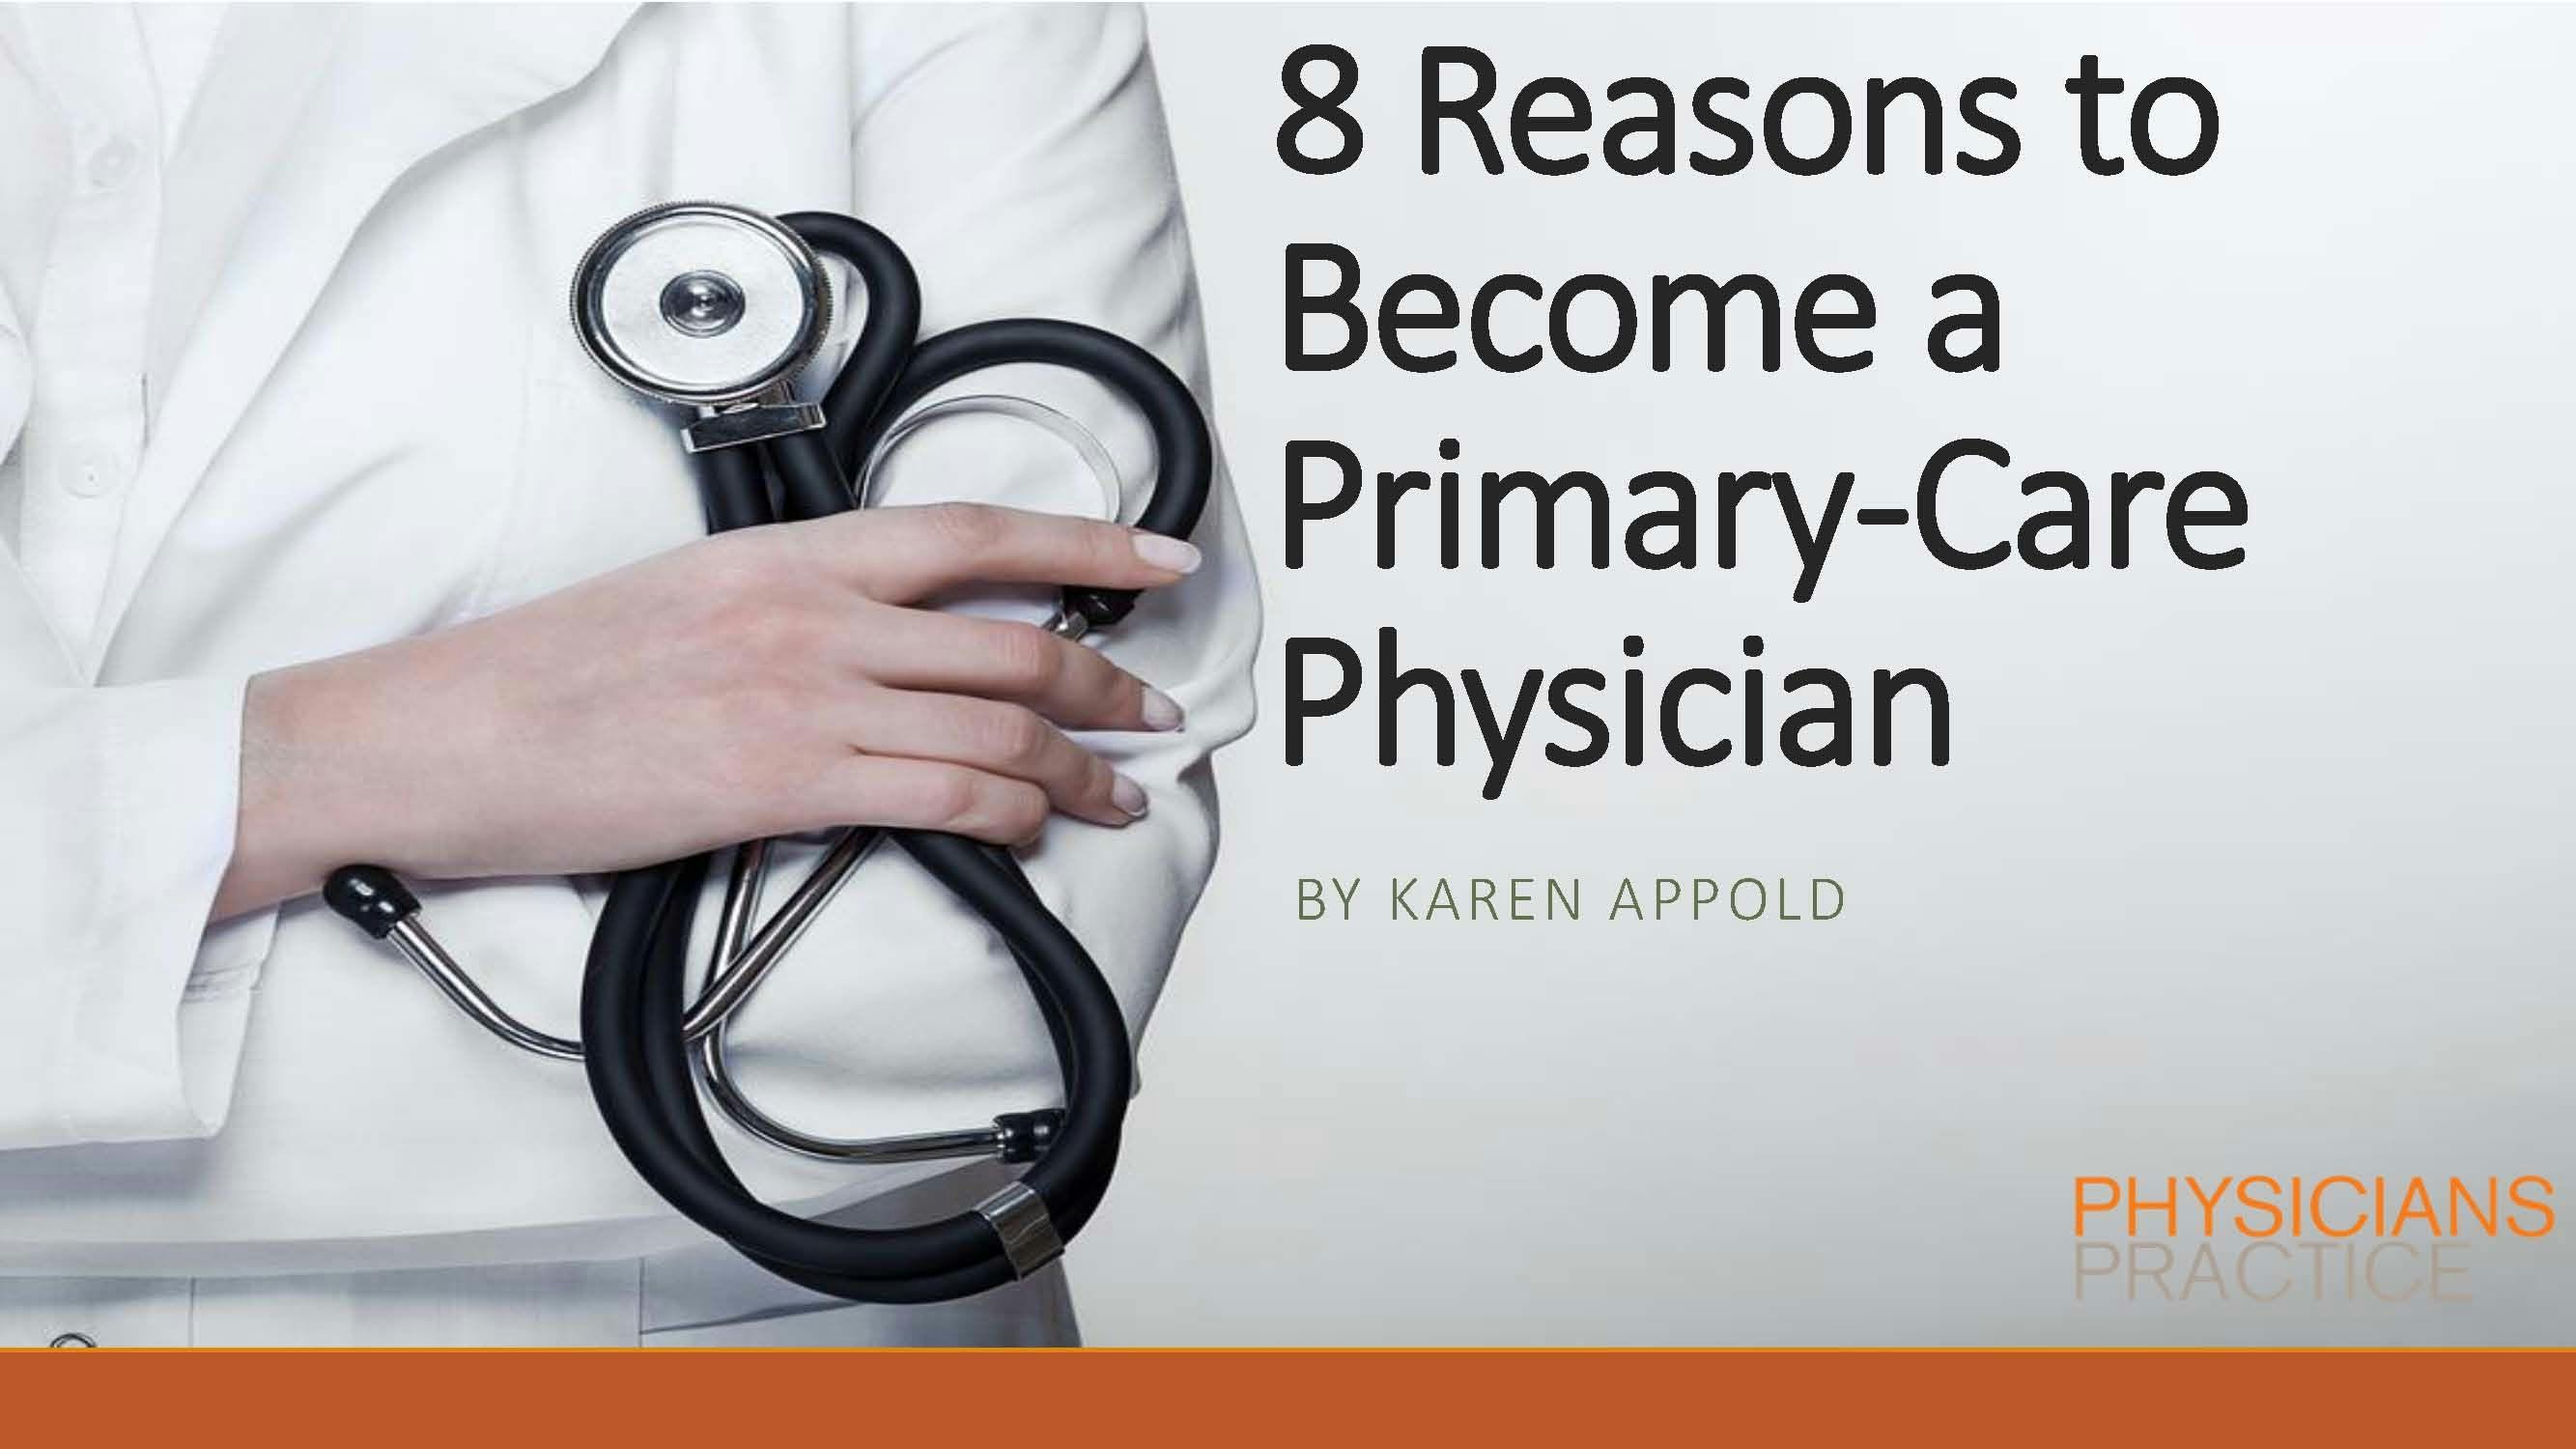 8 Reasons to Become a Primary-Care Physician